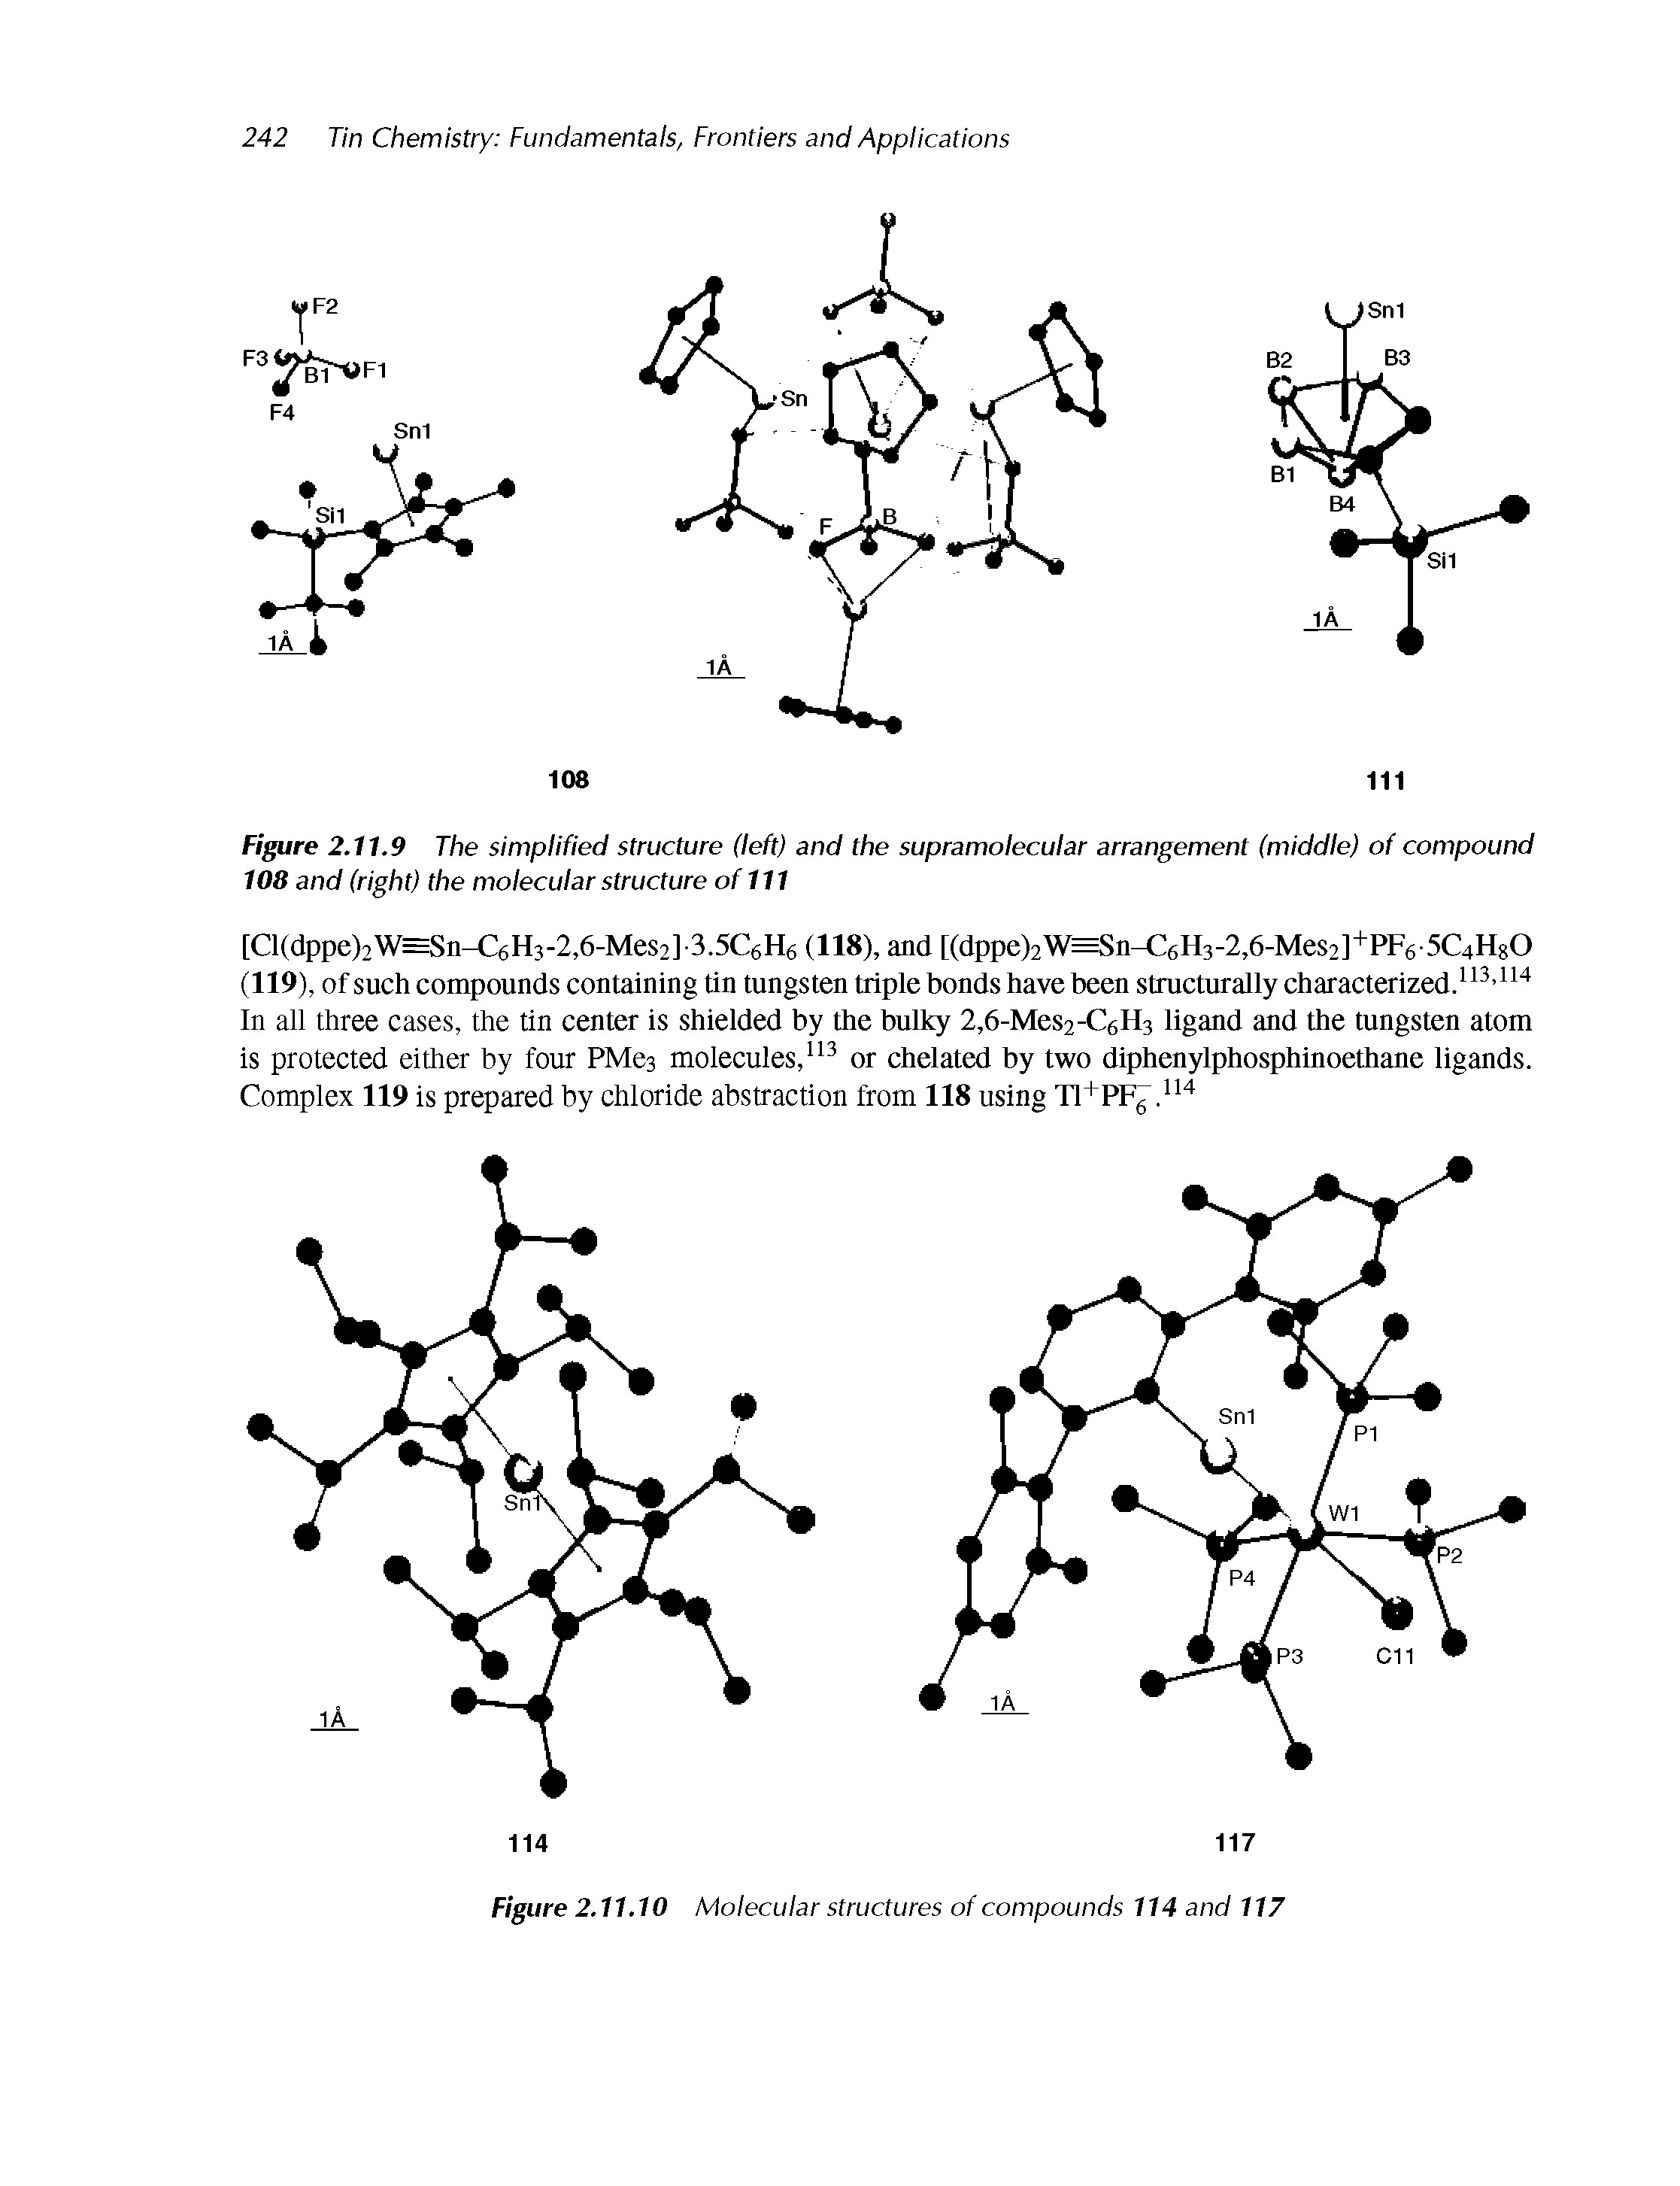 Figure 2.11.9 The simplified structure (left) and the supramolecular arrangement (middle) of compound 108 and (right) the molecular structure of 111...